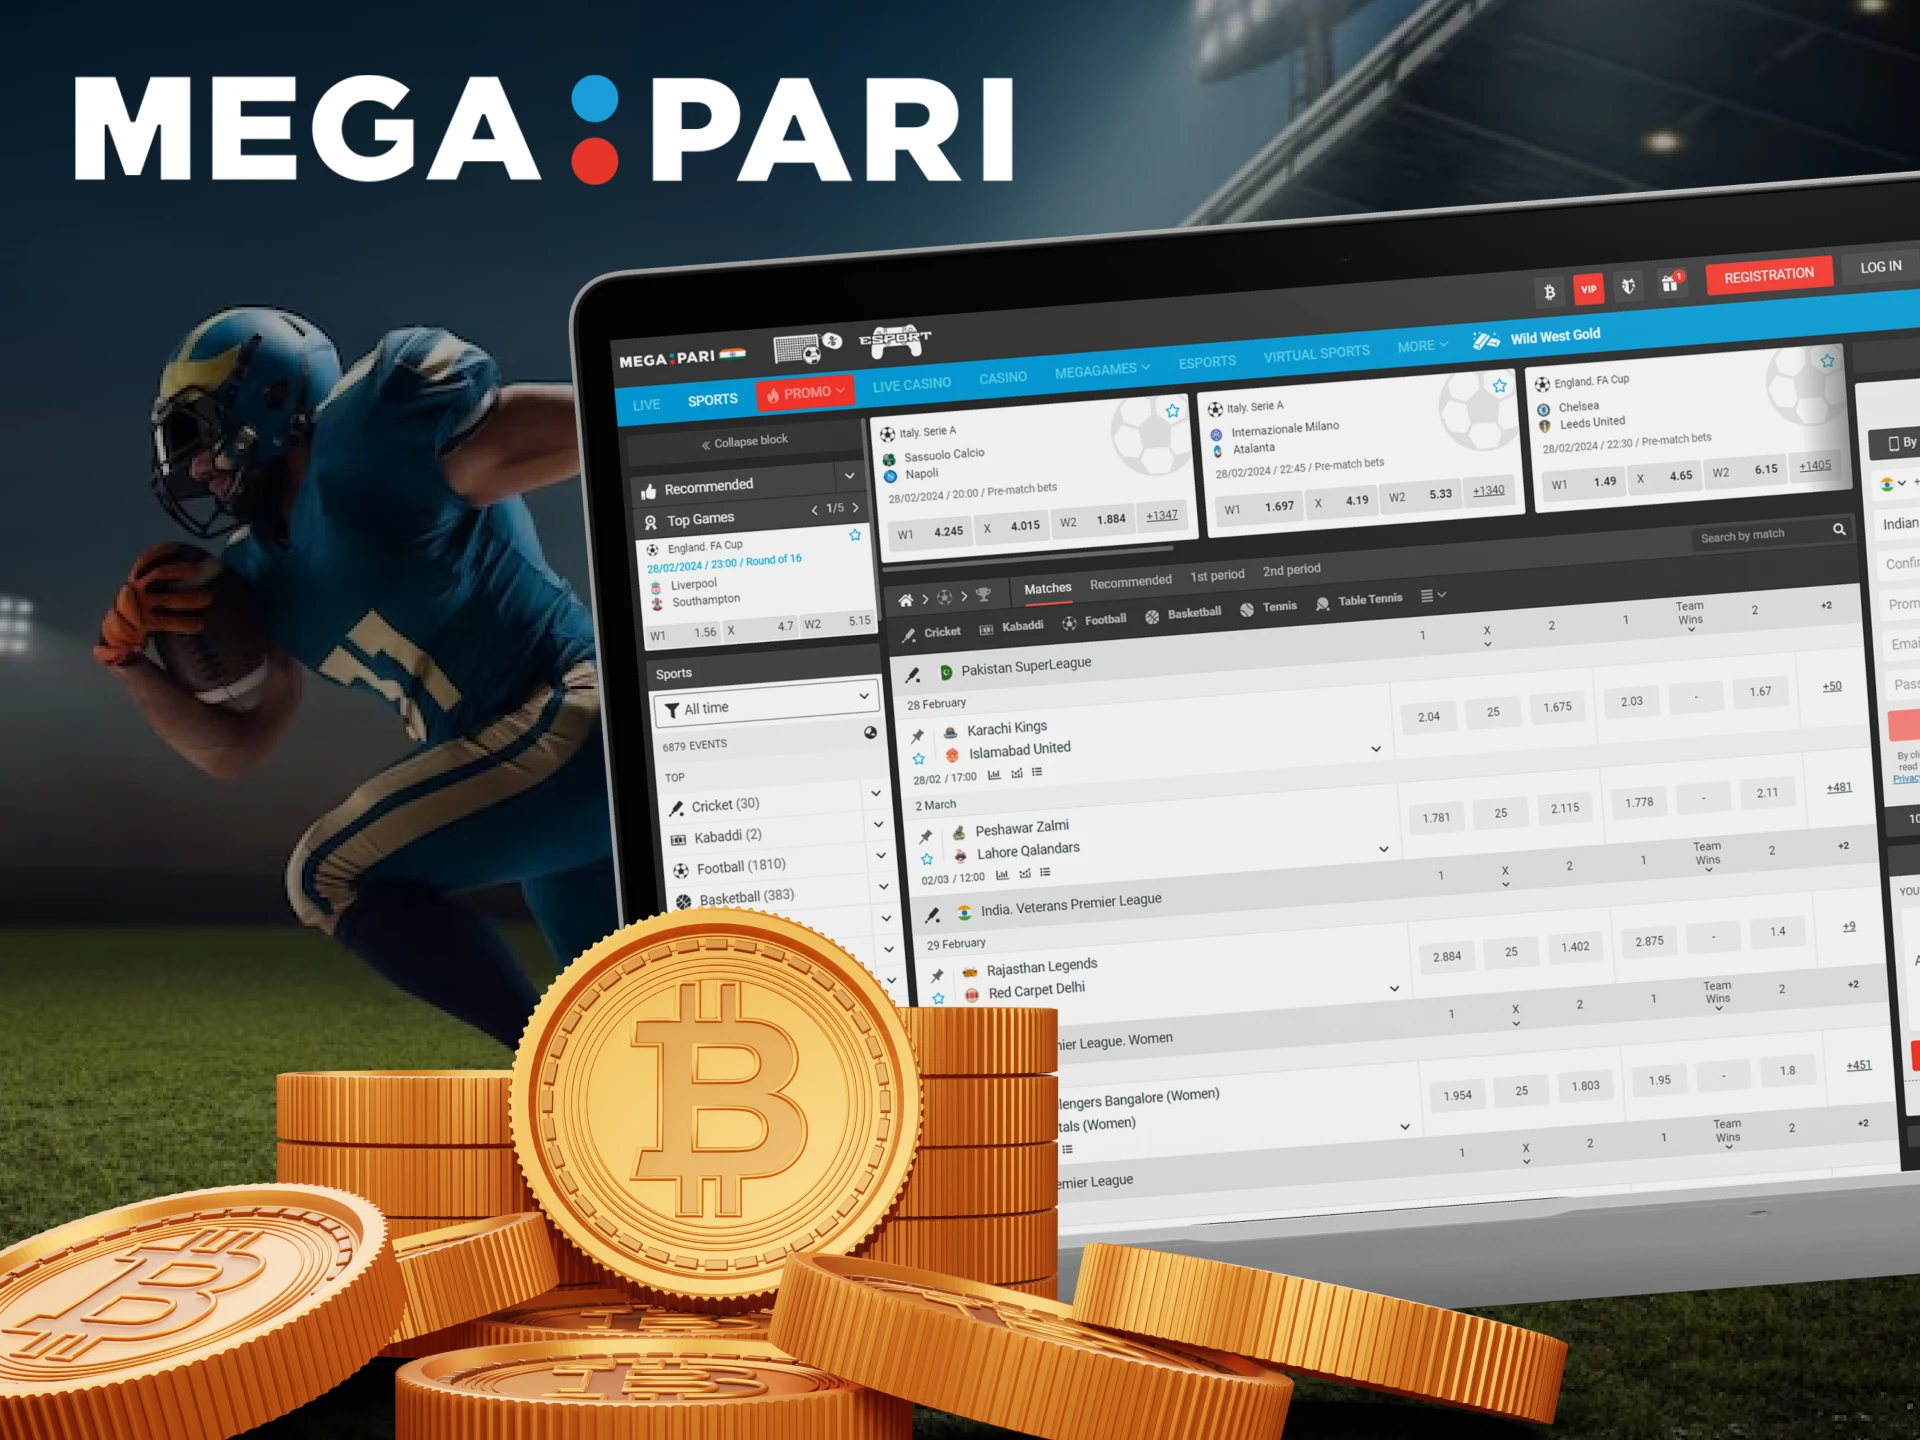 If you enjoy betting on sports, try betting with cryptocurrency at Megapari.